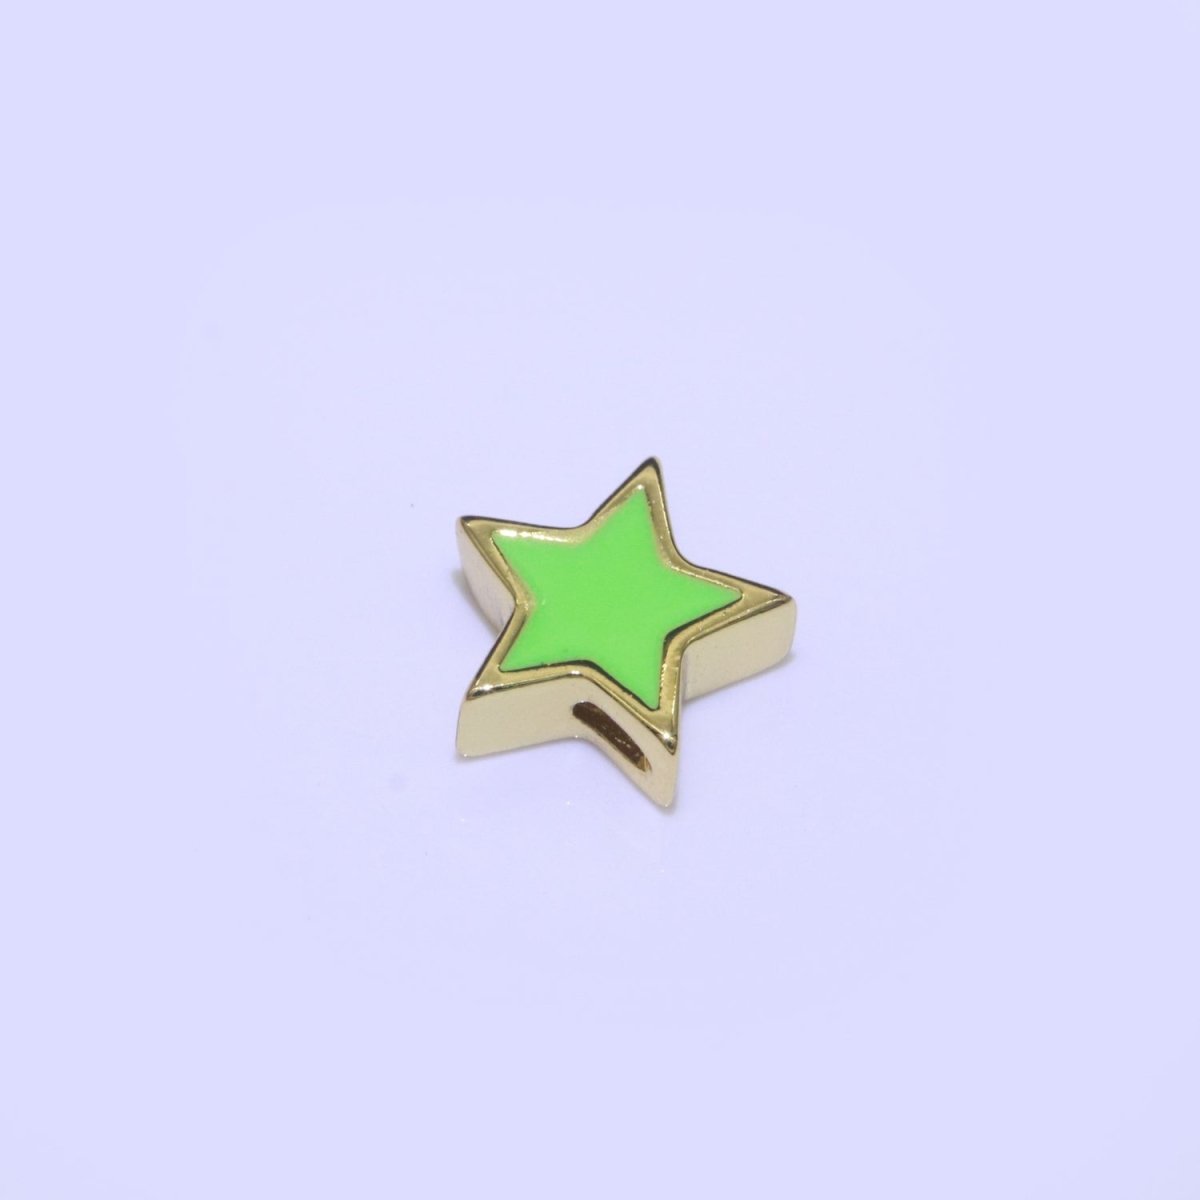 Dainty Colorful Star Spacer Beads, Green Black Pink Yellow Purple Teal Star beads for Necklace Bracelet Component 10mm Gold Beads B-593 to B602 - DLUXCA